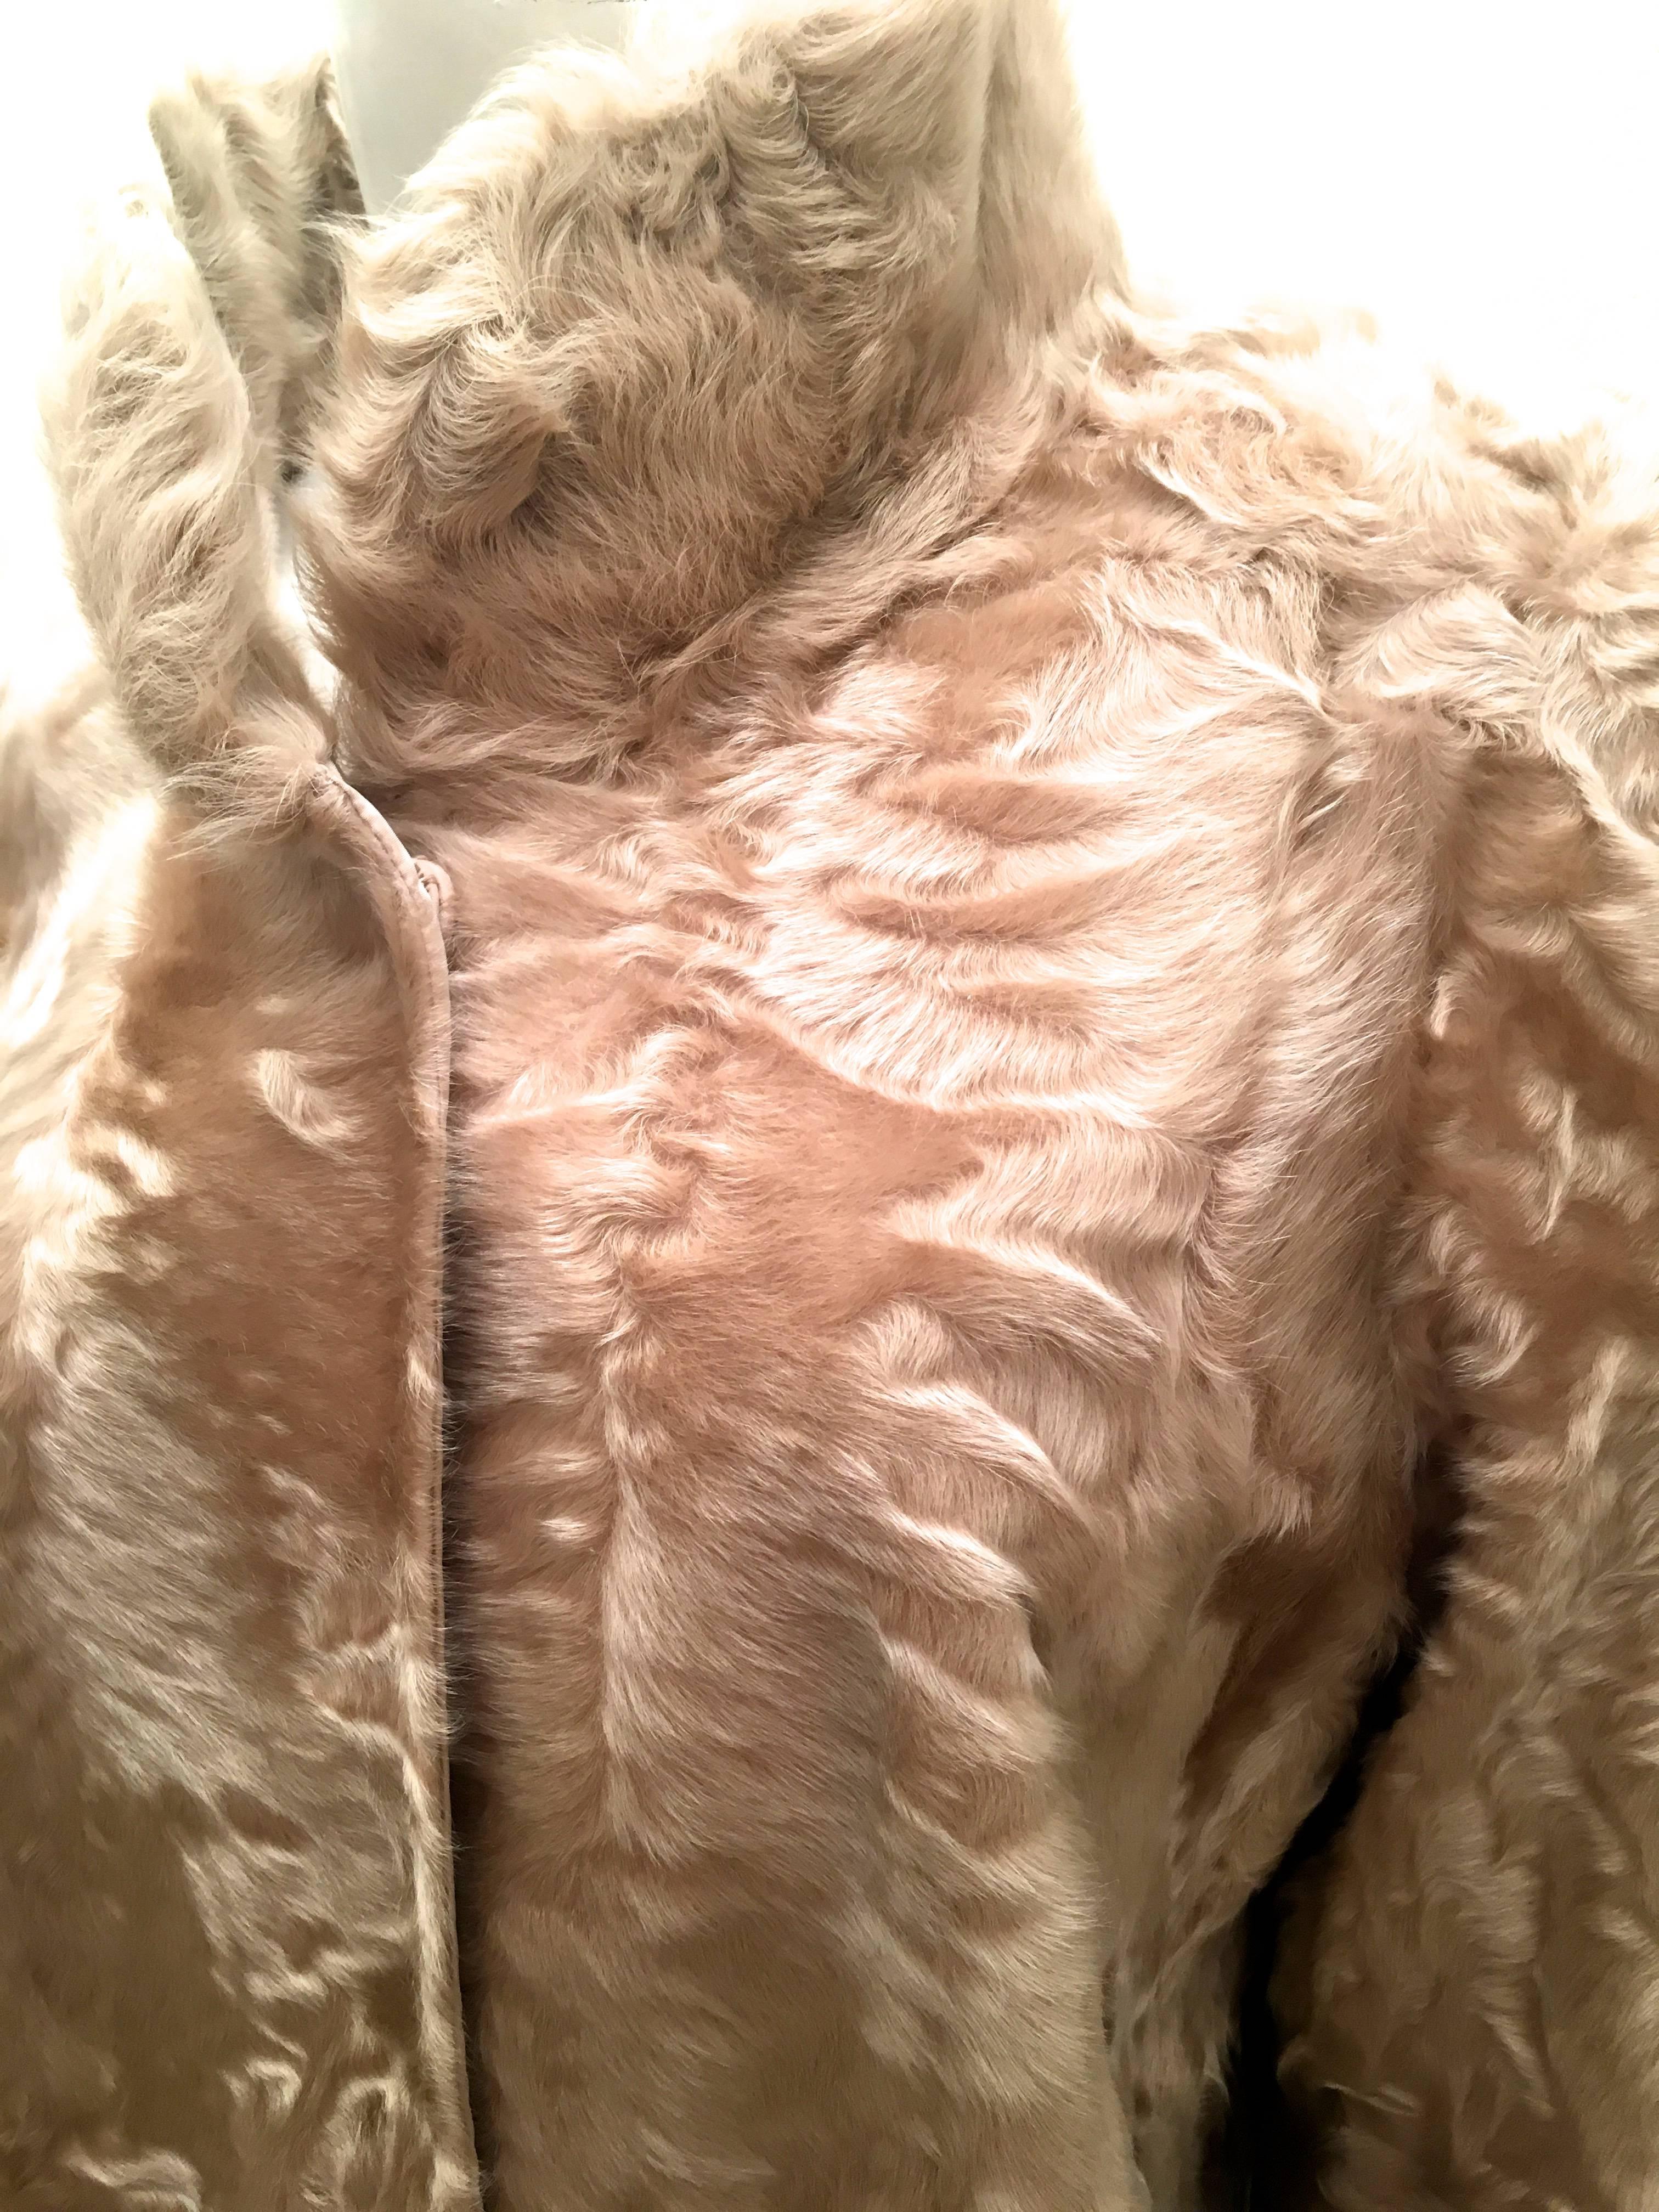 Presented here is a fabulous women's fur coat. This gorgeous coat is made from a beige lamb hair from Africa known as 'swakara.' The coat on the reverse side is made entirely from a silk taffeta. The coat is fully reversible and can be worn on